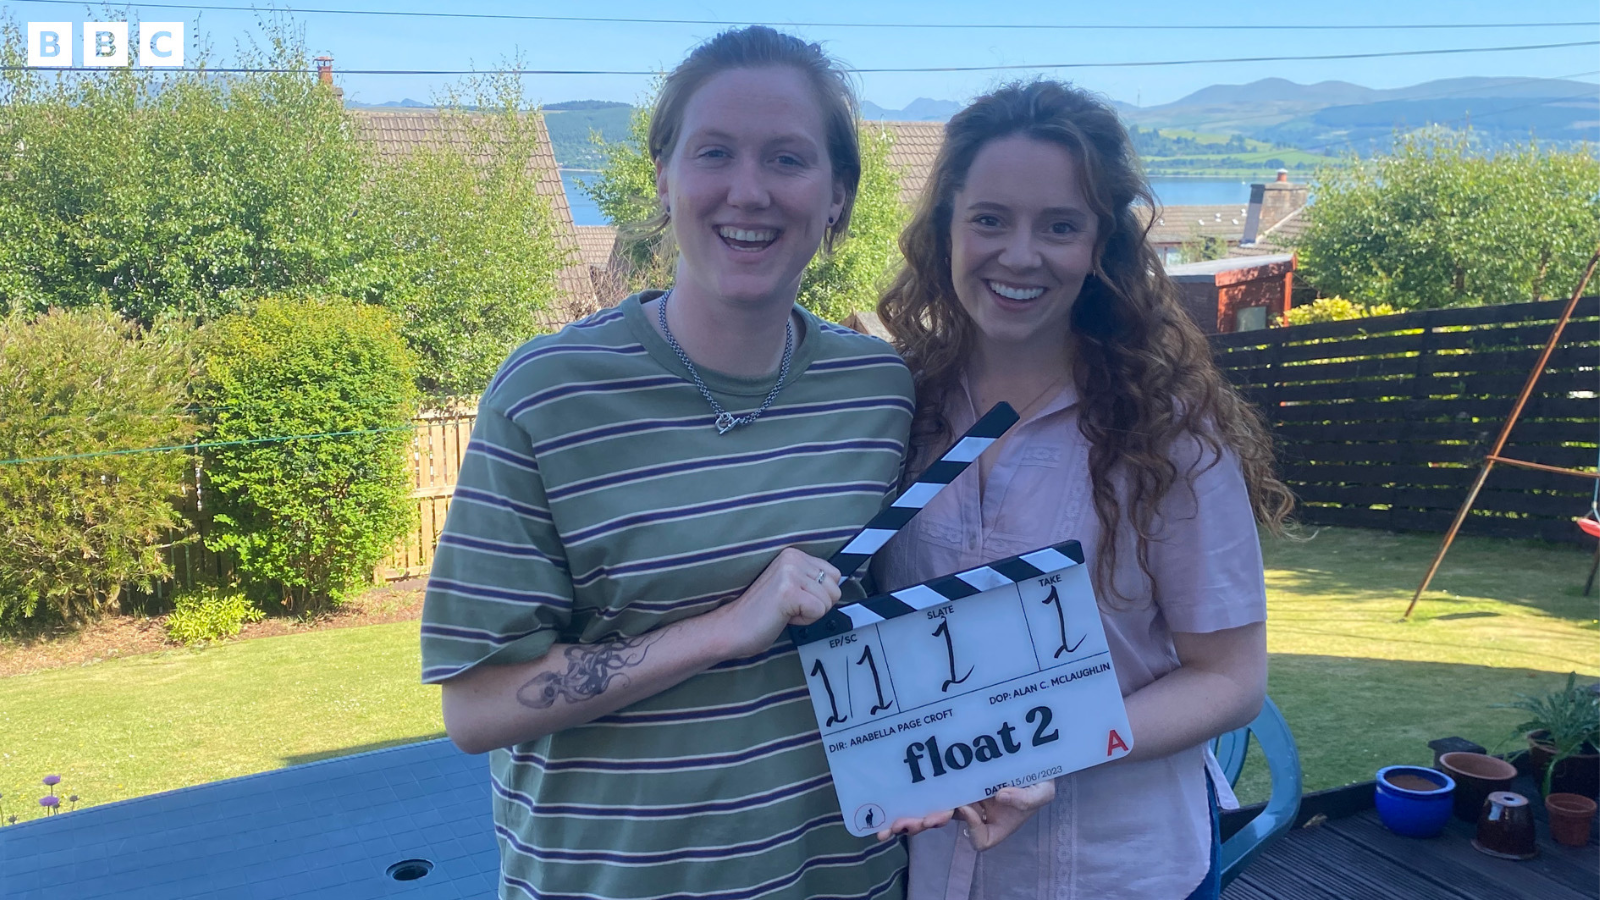 Actresses Hannah Jarrett Scott and Jessica Hardwick stand in a garden with trees and shrubbery side by side holding a clapper board with float 2 written on it in black txt.